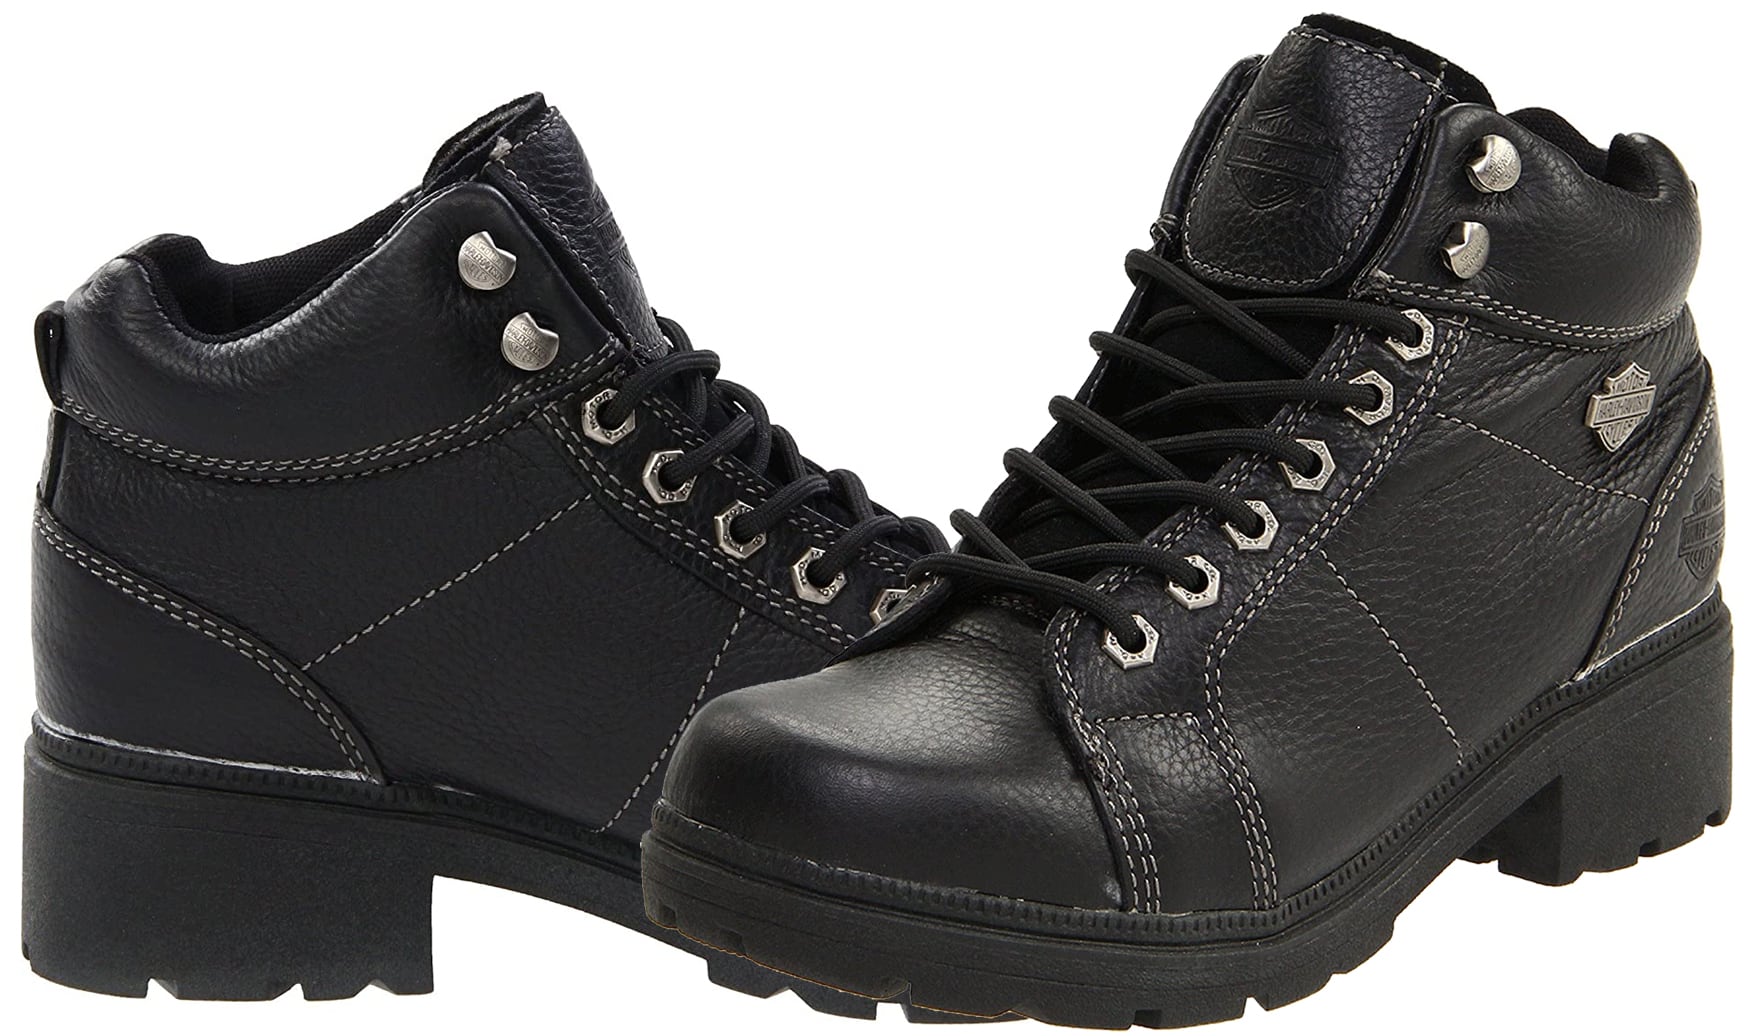 The Harley Davidson Tyler boots boast a classic silhouette with a padded collar and cushioned lining for comfort